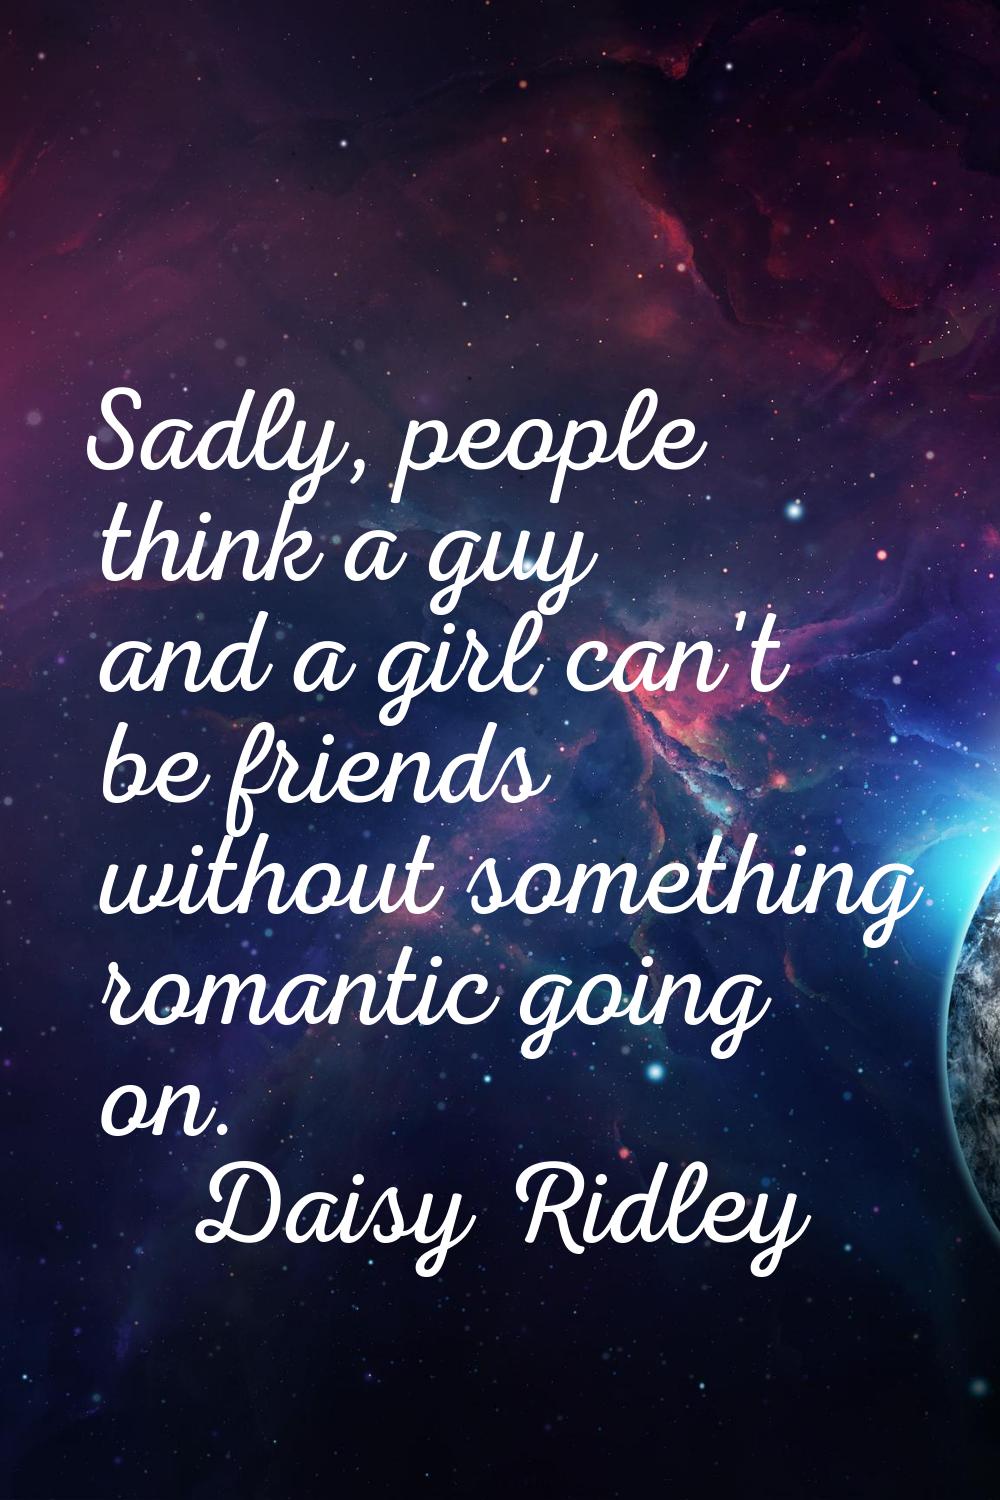 Sadly, people think a guy and a girl can't be friends without something romantic going on.